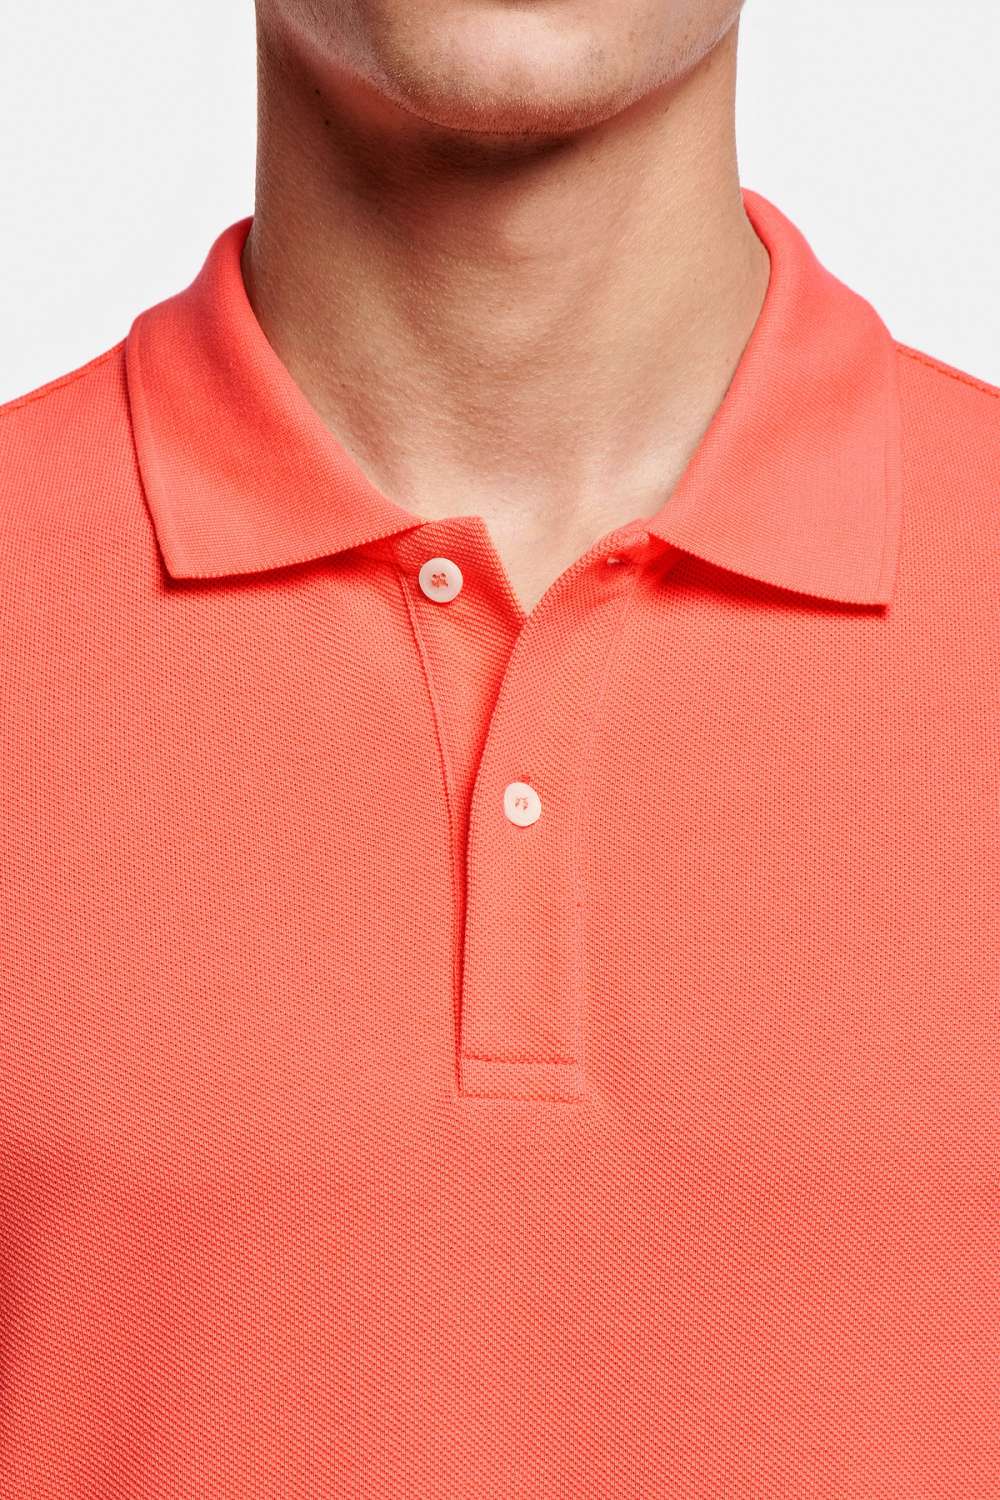 Sunsets * The Classic Polo